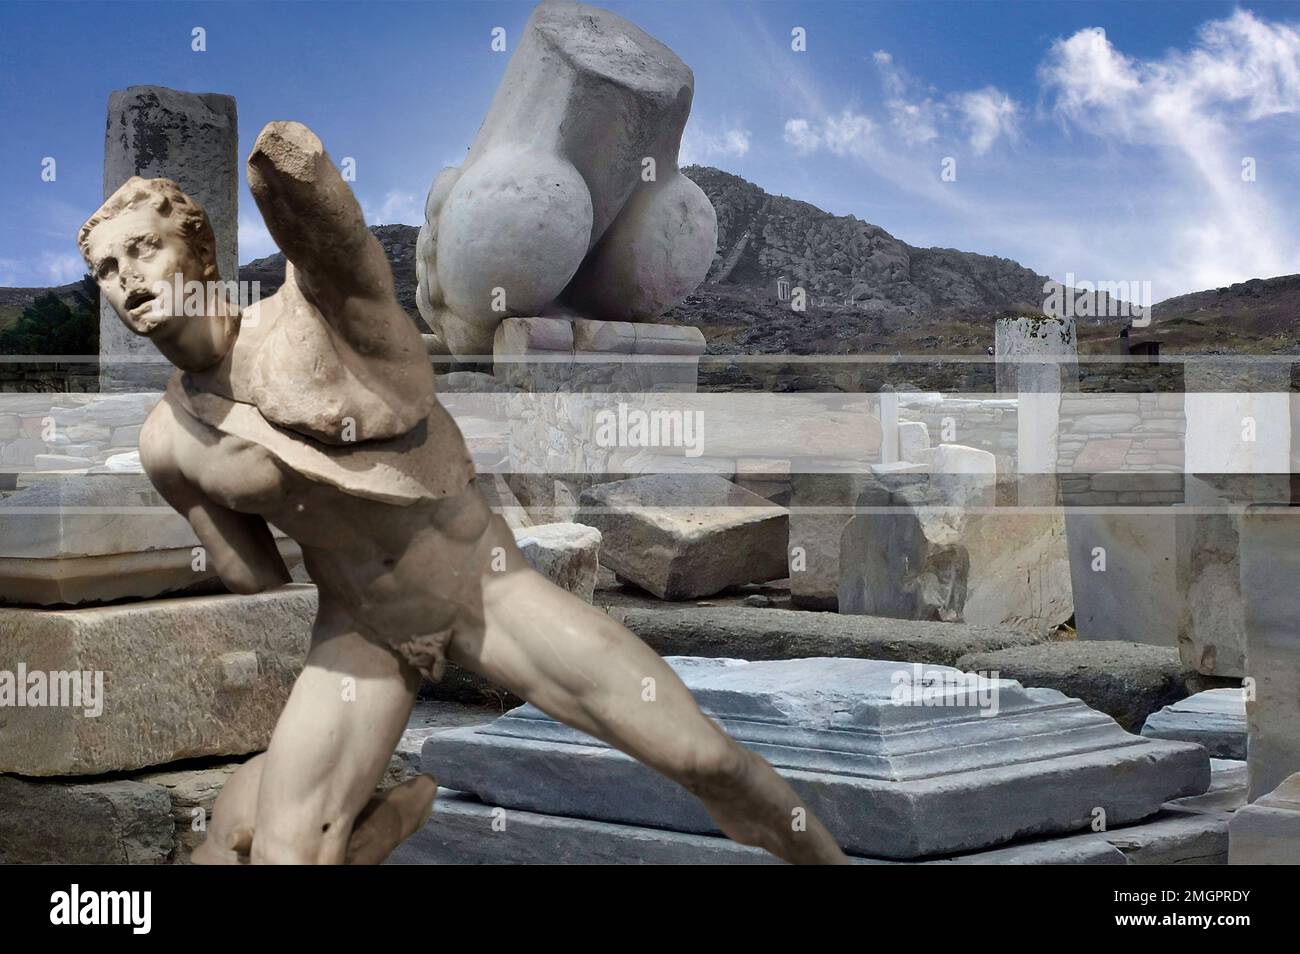 Ruins and marble statues on the island of Delos, Greece. Architecture of ancient Greece, it is one of the largest open-air museums of antiquity Stock Photo